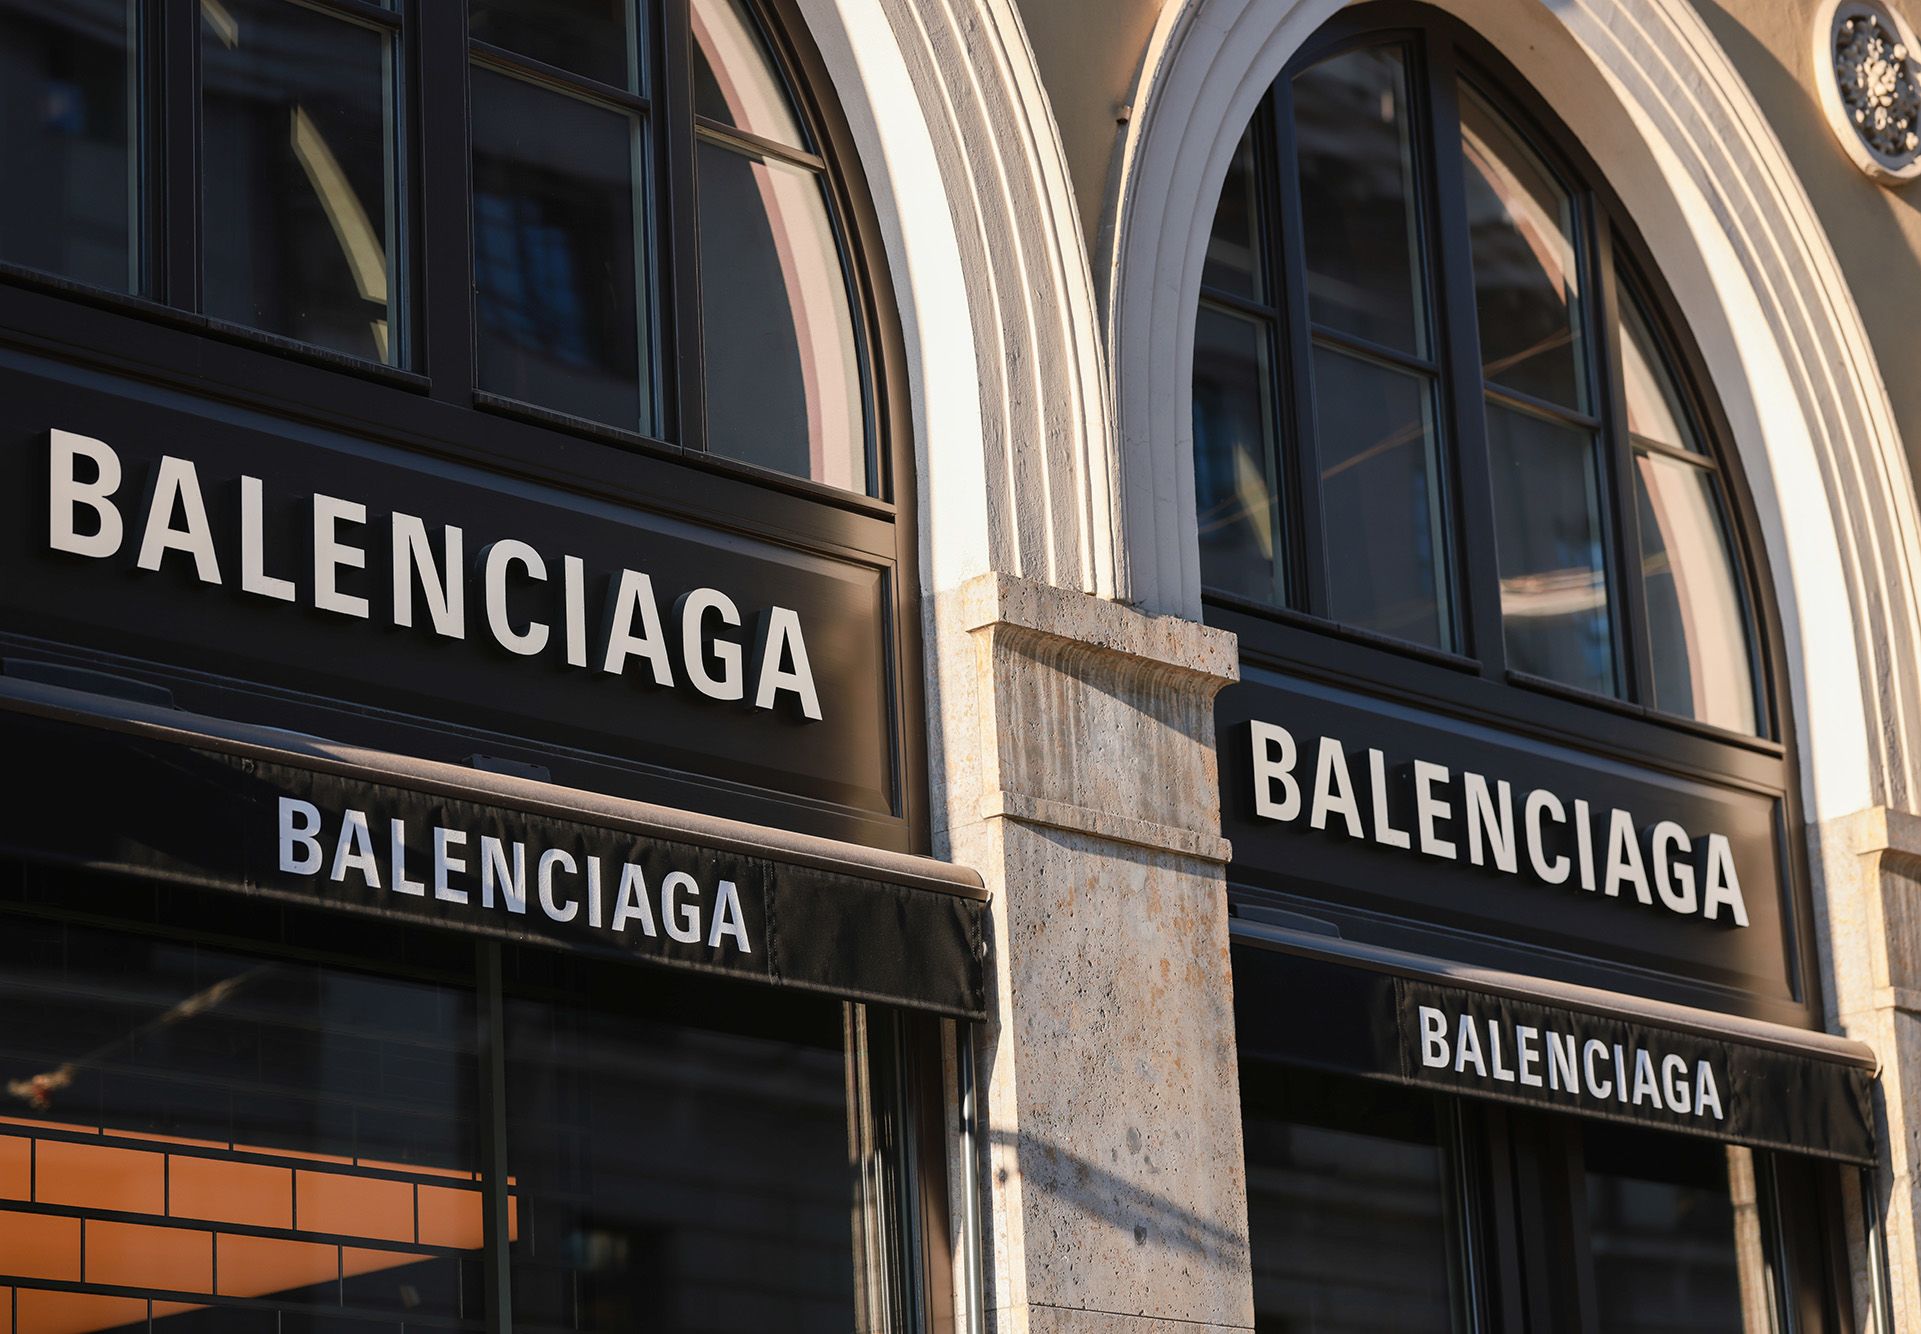 Balenciaga Under Fire For “Sexualizing” Children - The New Paltz Oracle